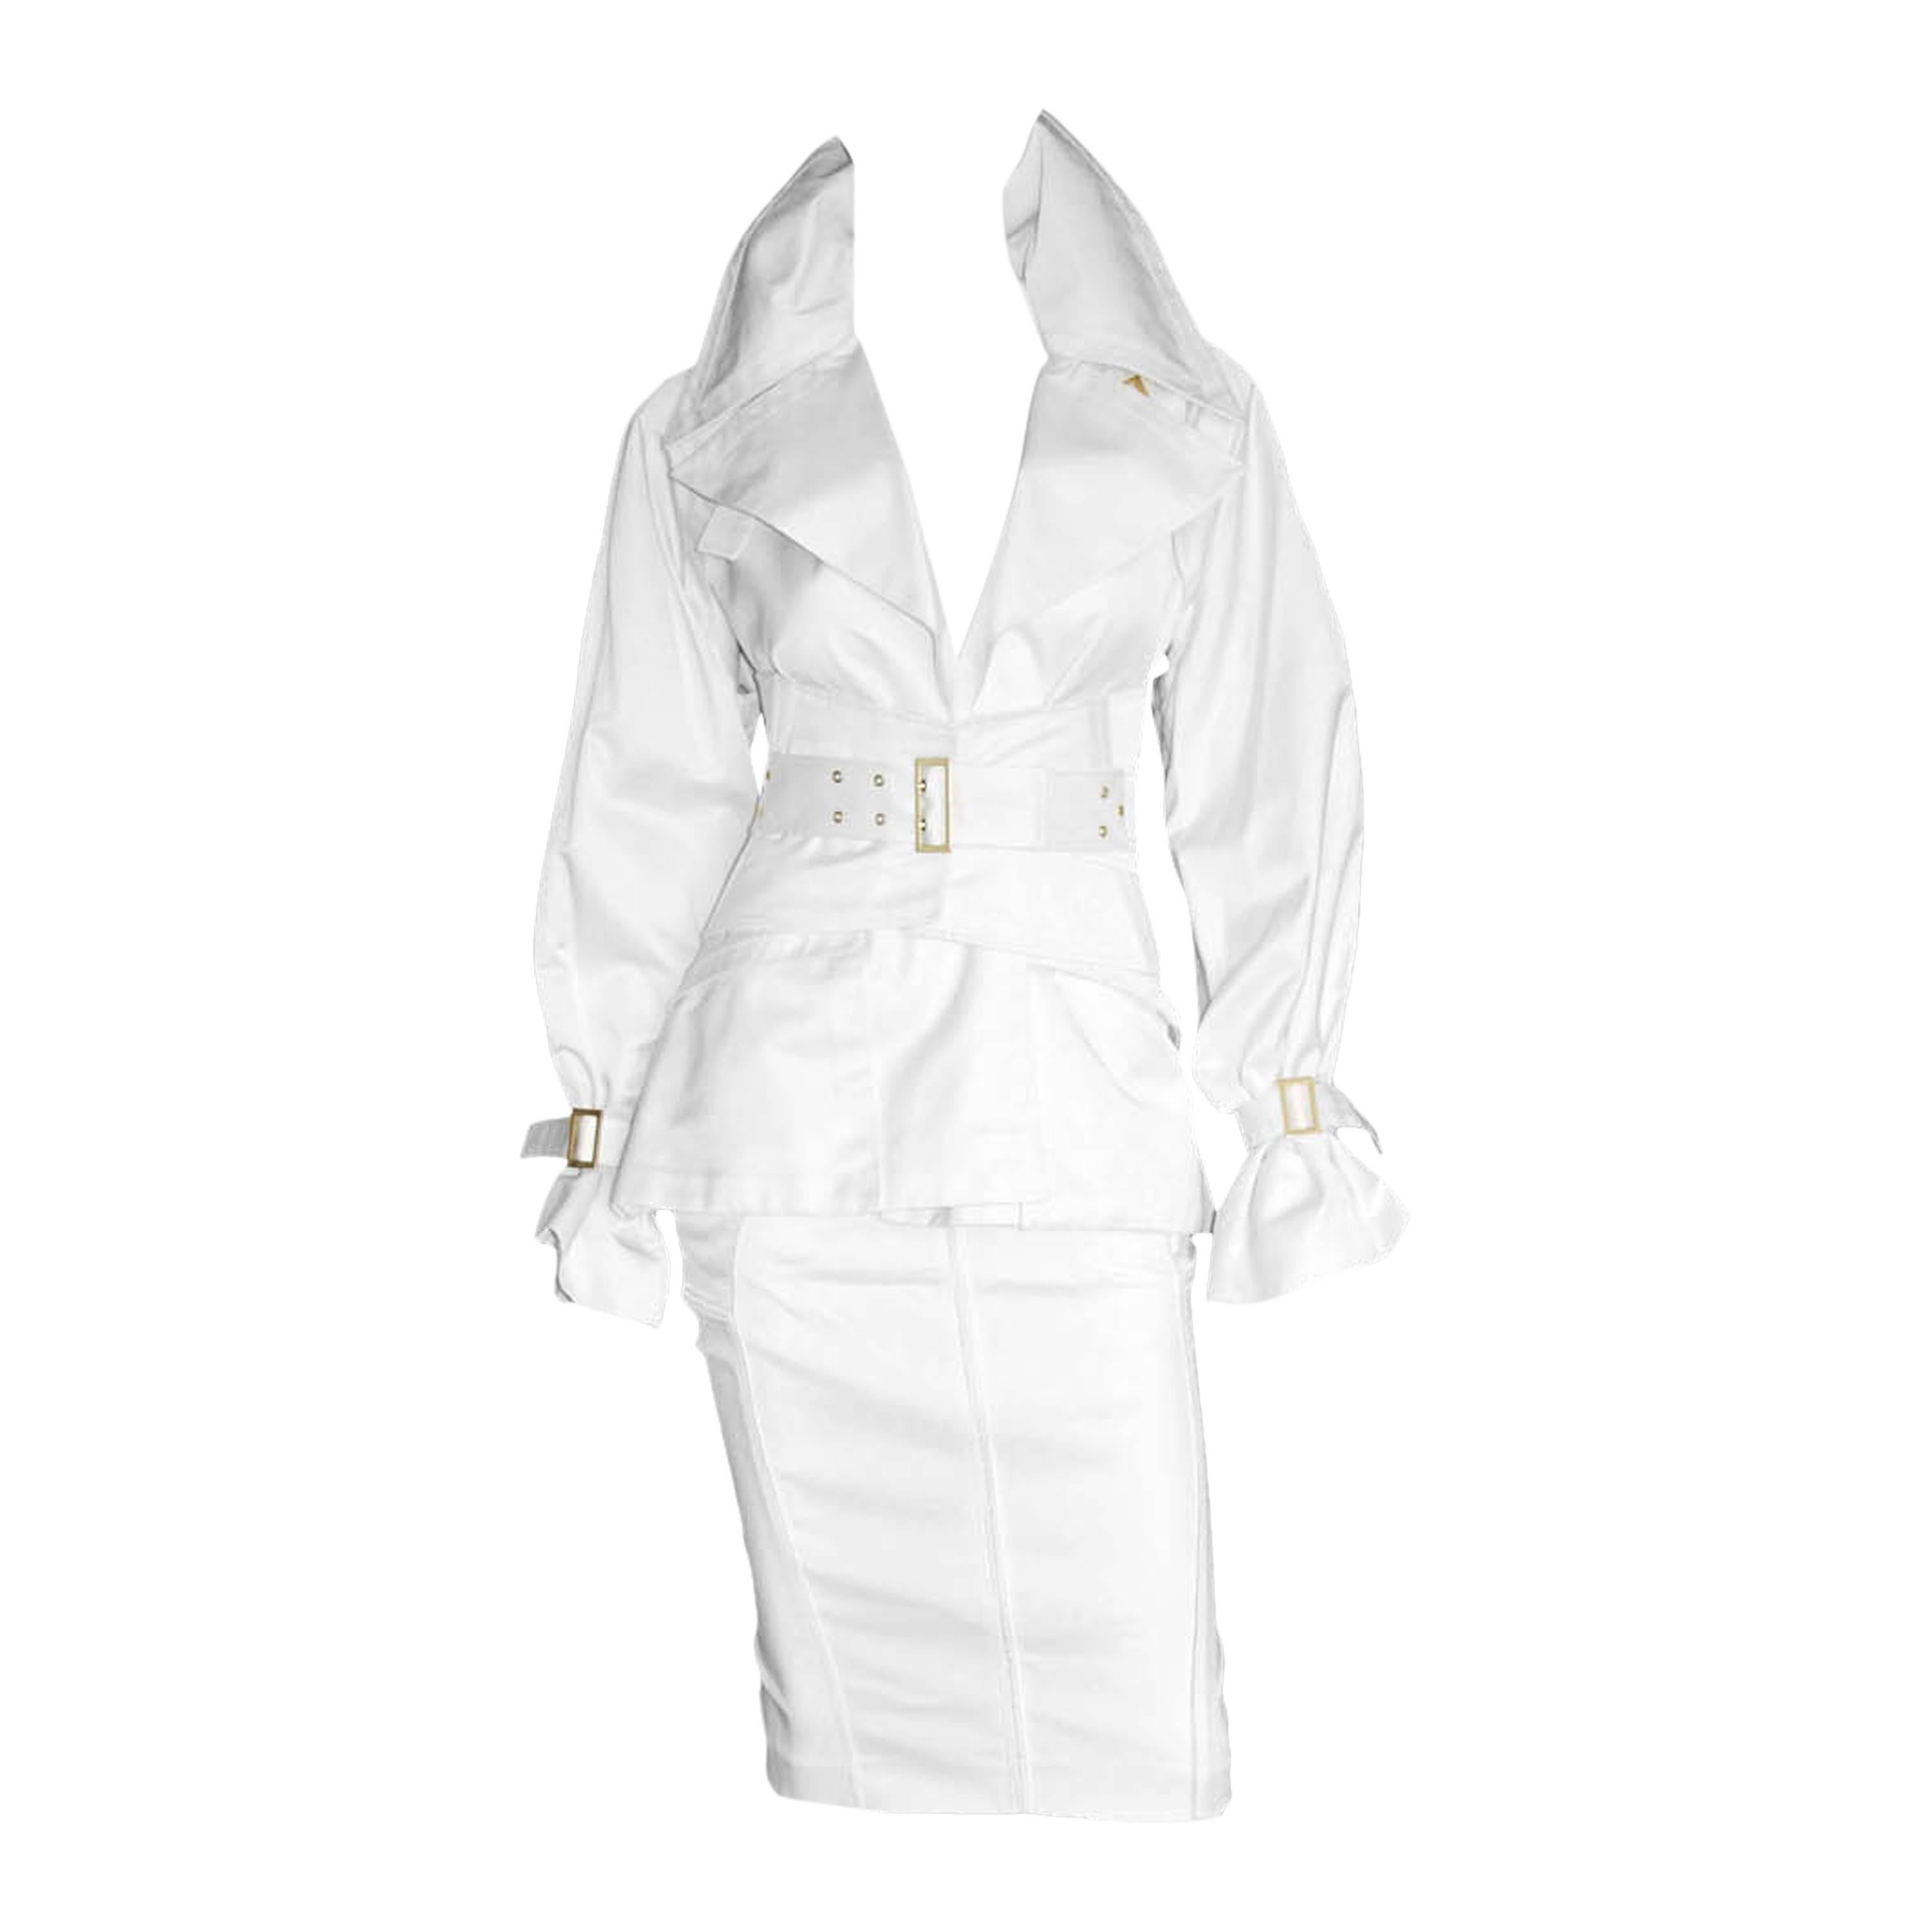 Incredibly Rare Tom Ford For Gucci FW 2003 White Corsetted Runway Jacket & Skirt